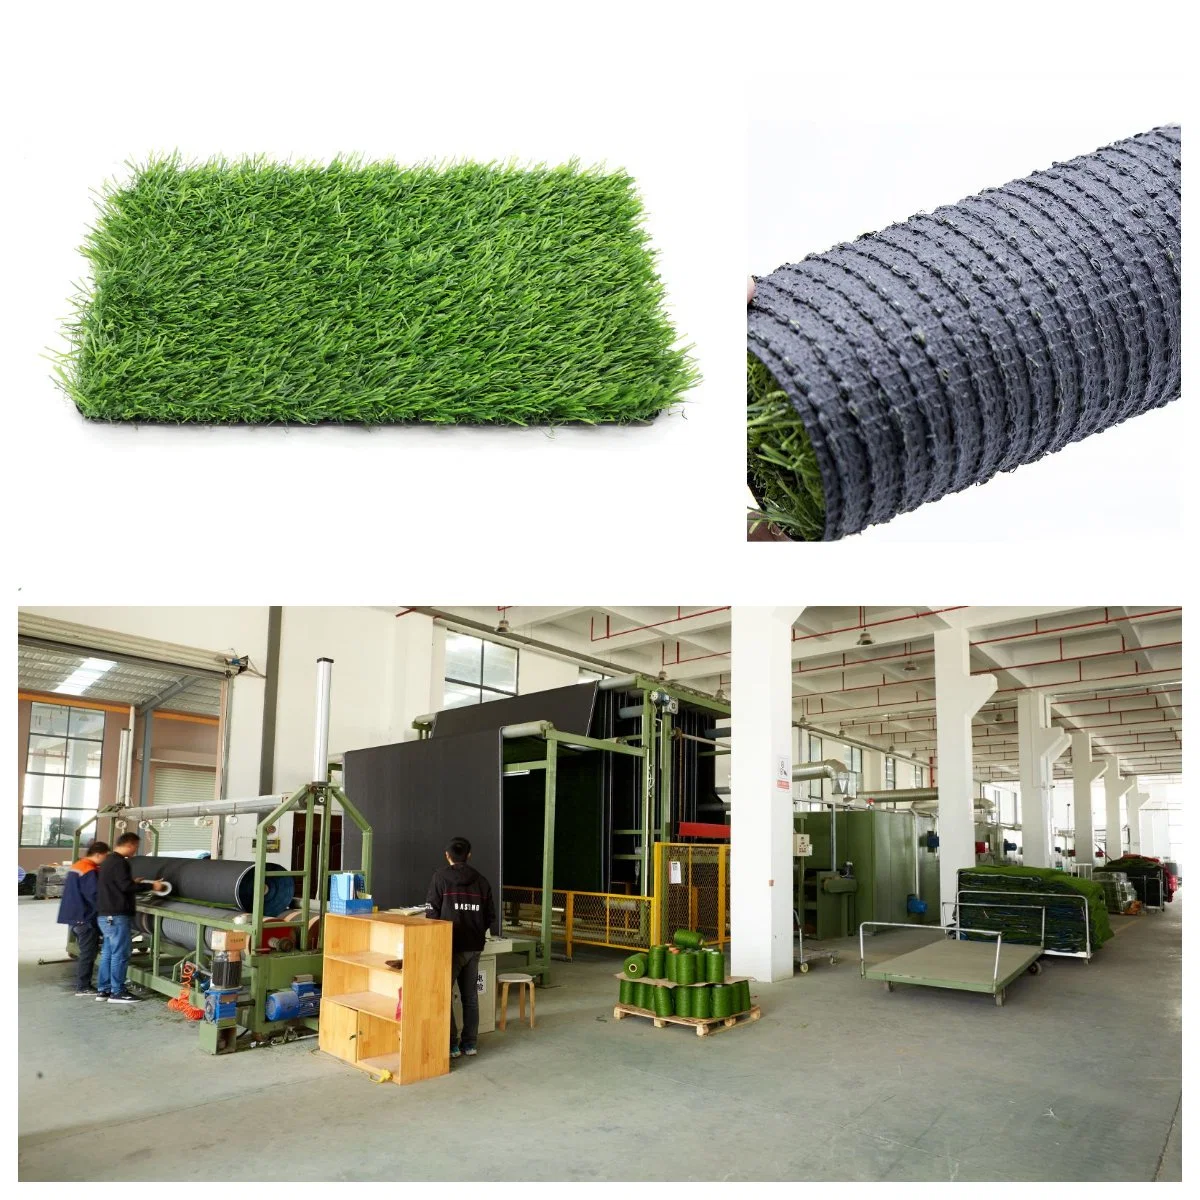 Plant Fake Grass Synthetic Lawn Grass Football Landscaping 12mm Artificial Turf